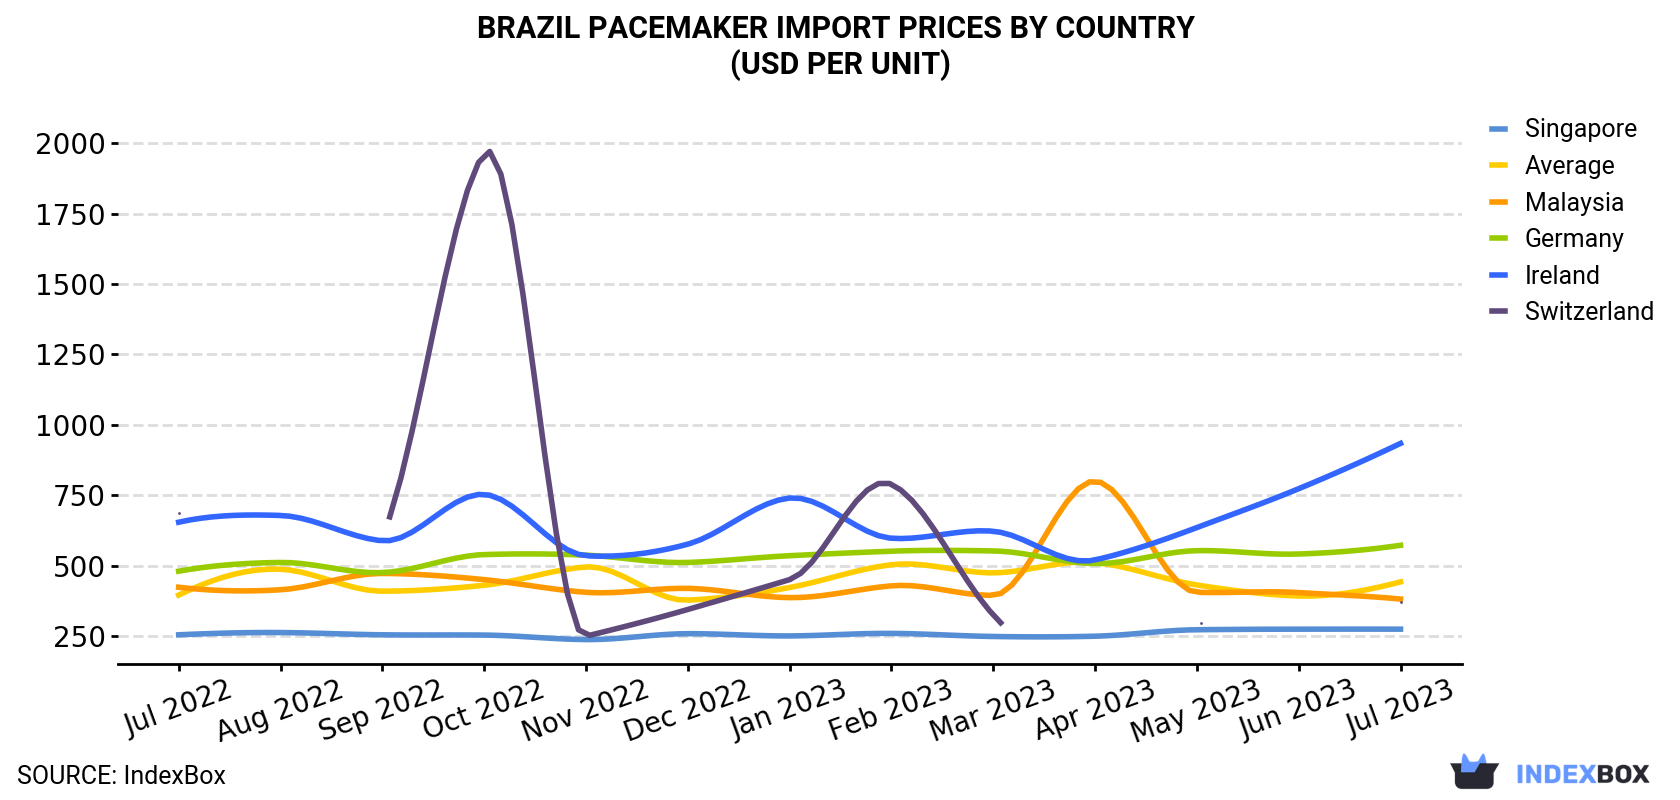 Brazil Pacemaker Import Prices By Country (USD Per Unit)